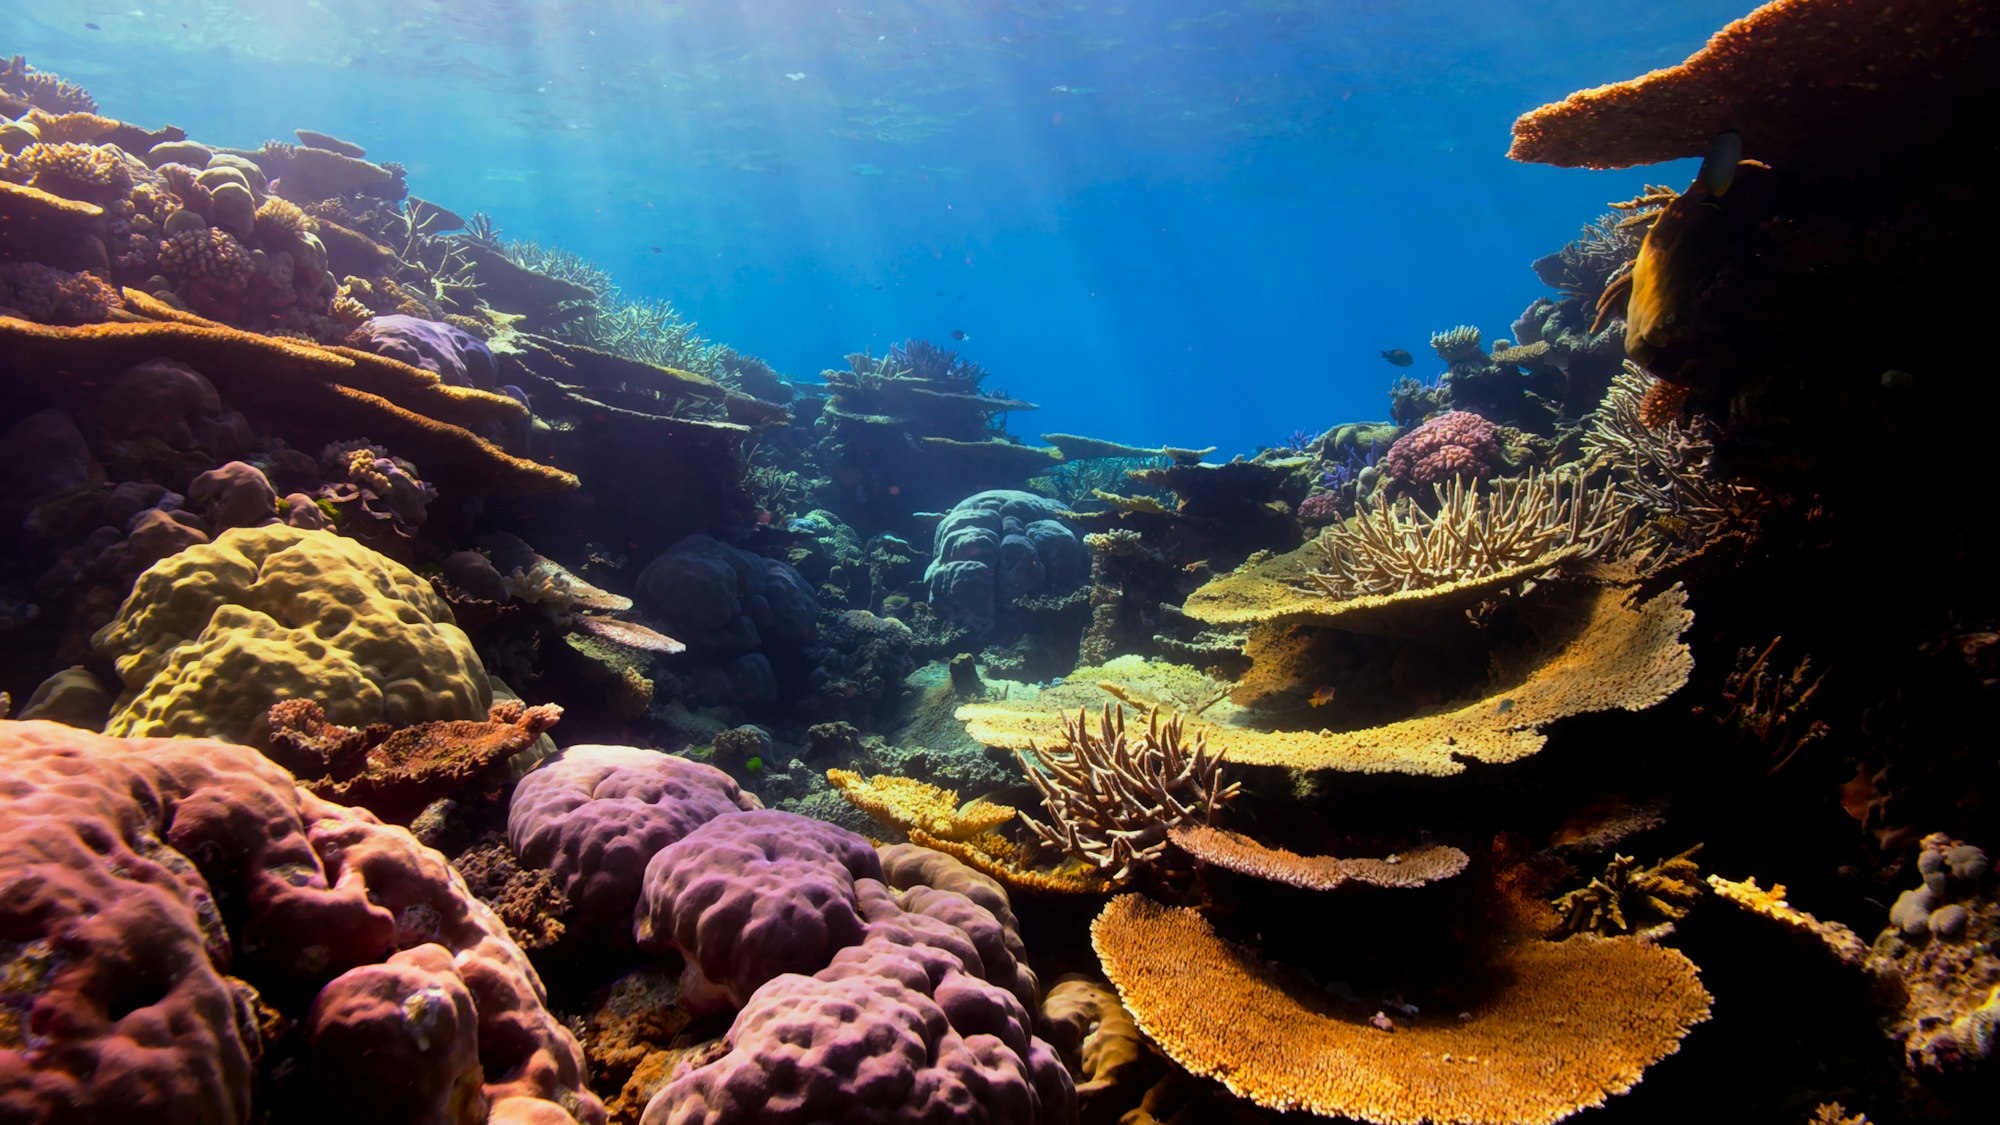 an underwater view of corals and sponges in the ocean